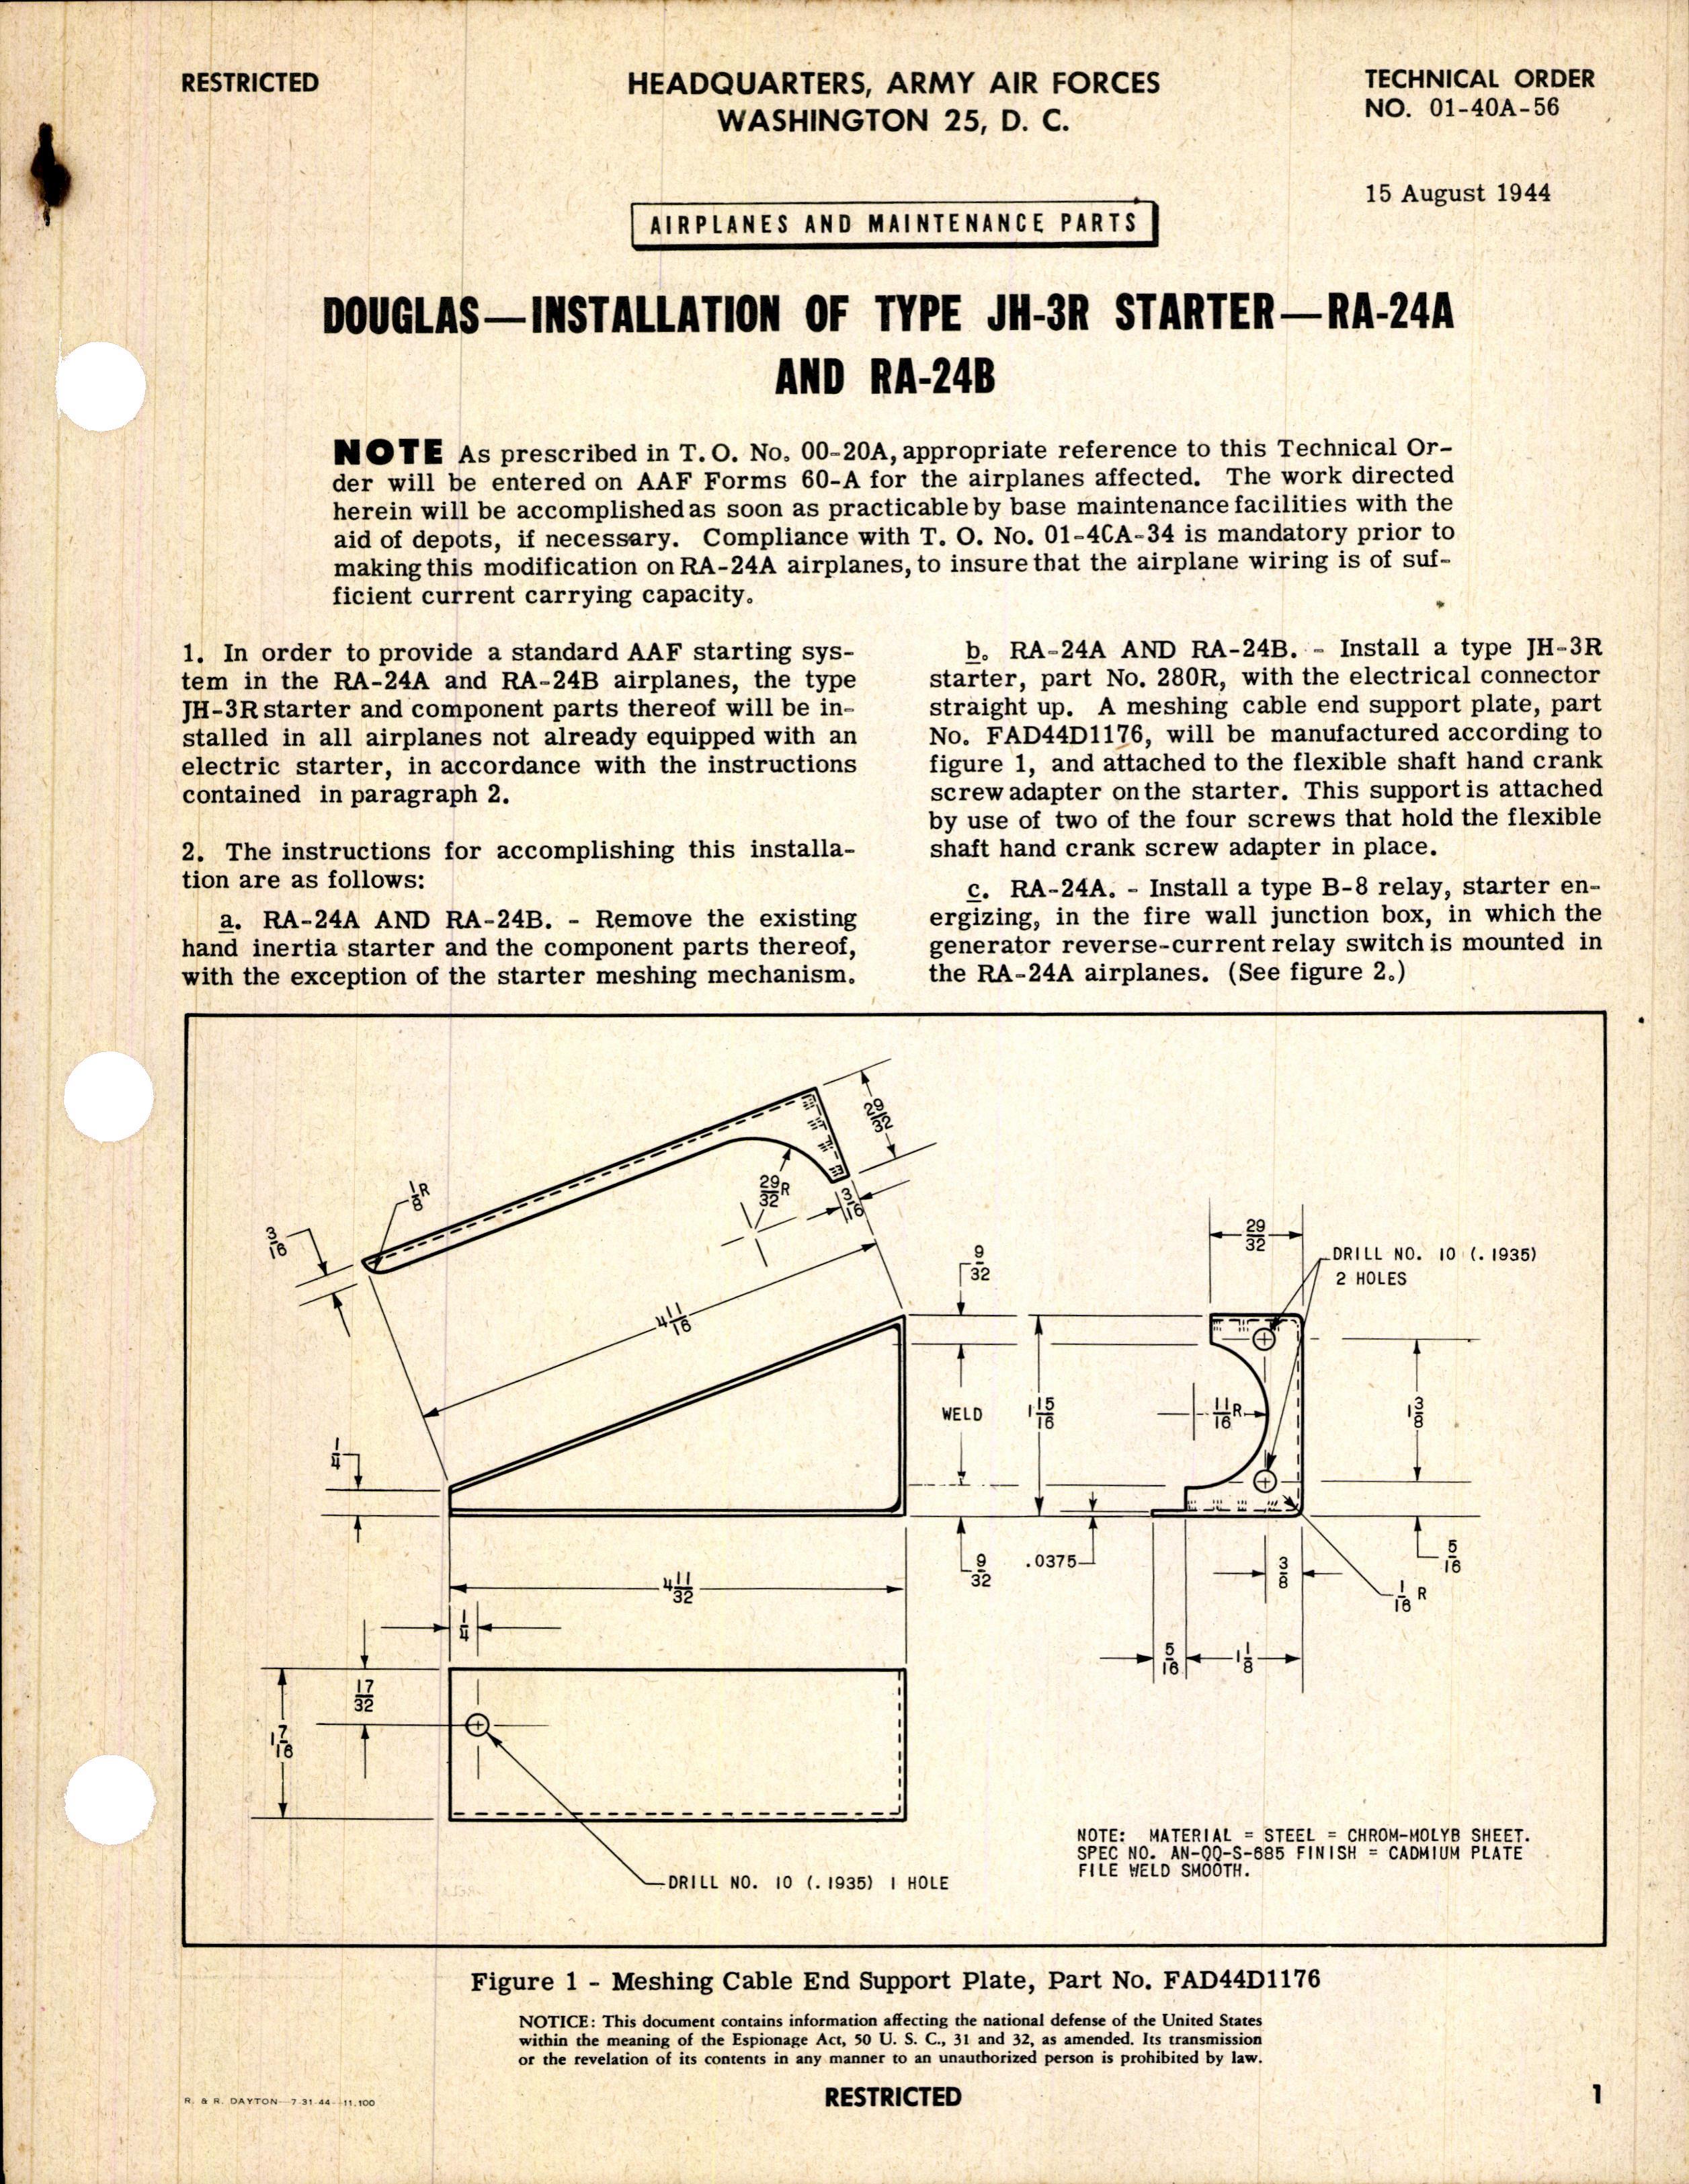 Sample page 1 from AirCorps Library document: Installation of Type JH-3R Starter for RA-24 and RA-24A